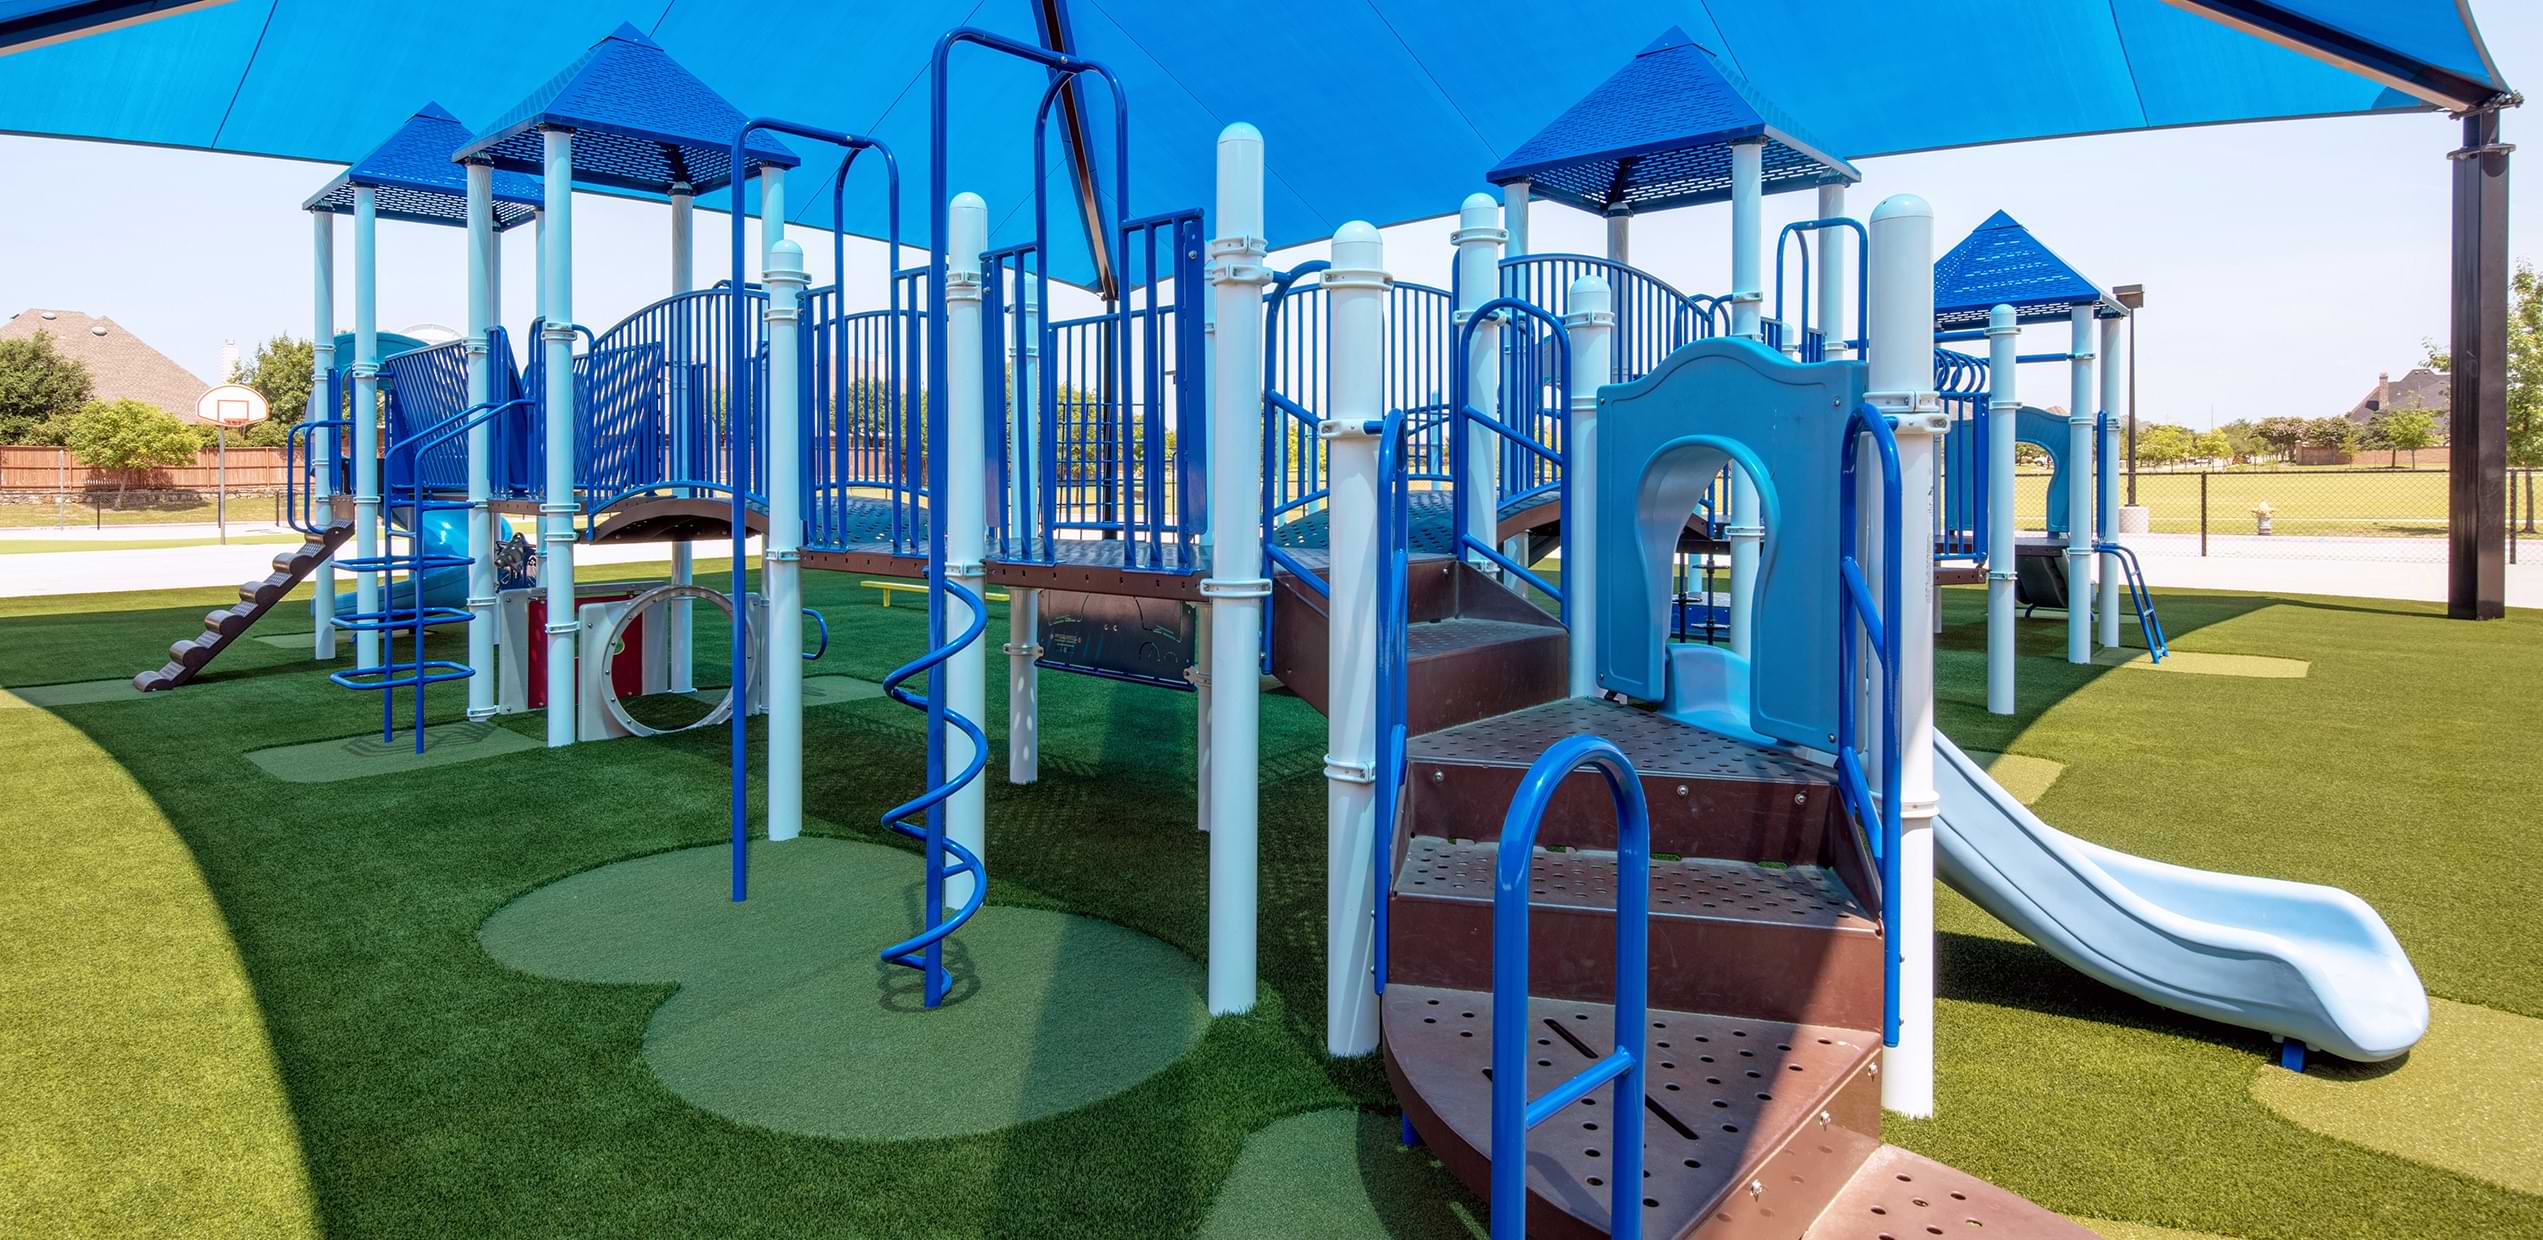 Blue jungle gym installed on artificial playground grass from SYNLawn